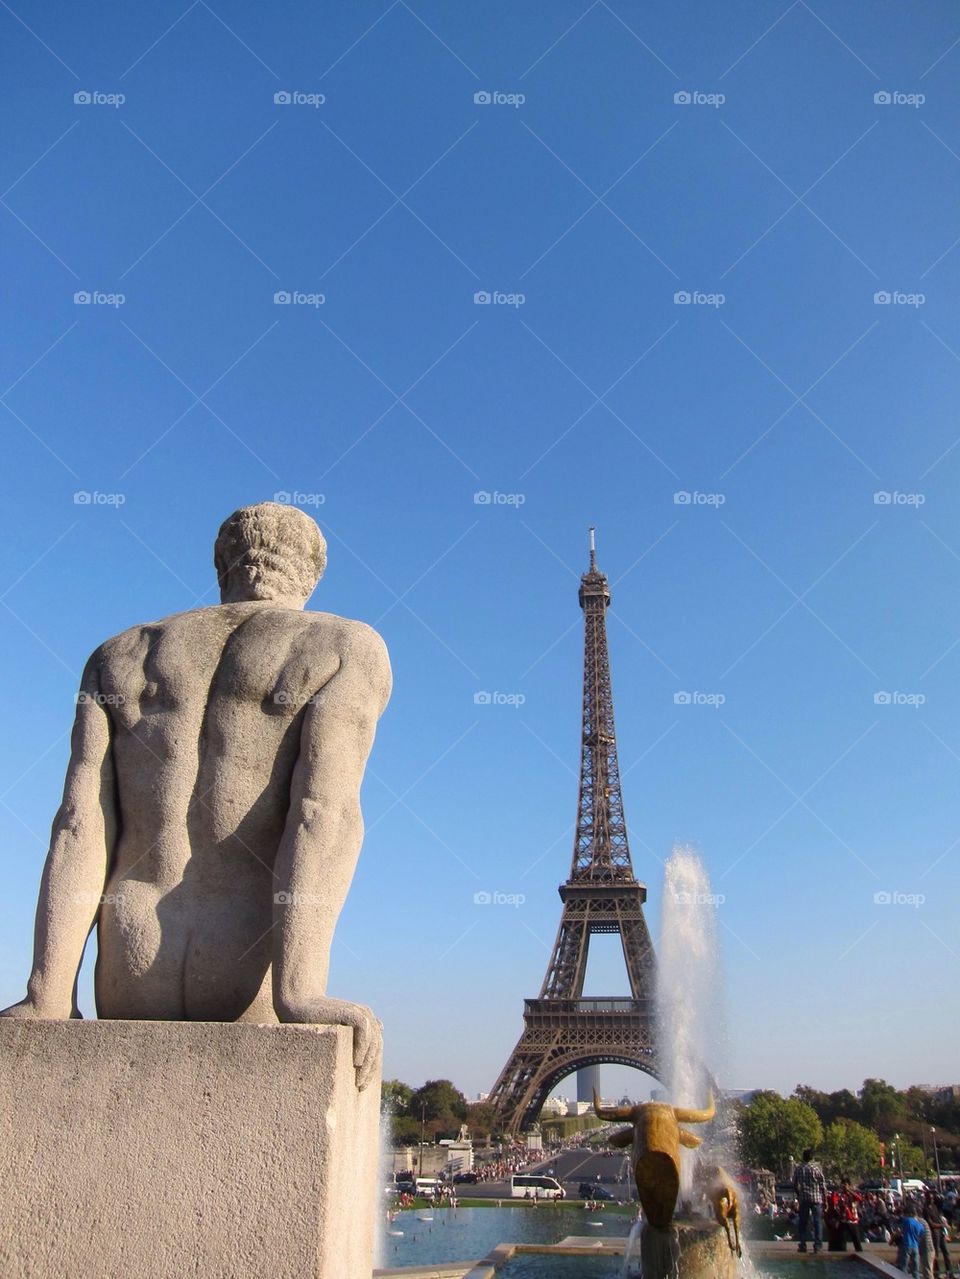 Statue and Eiffel Tower